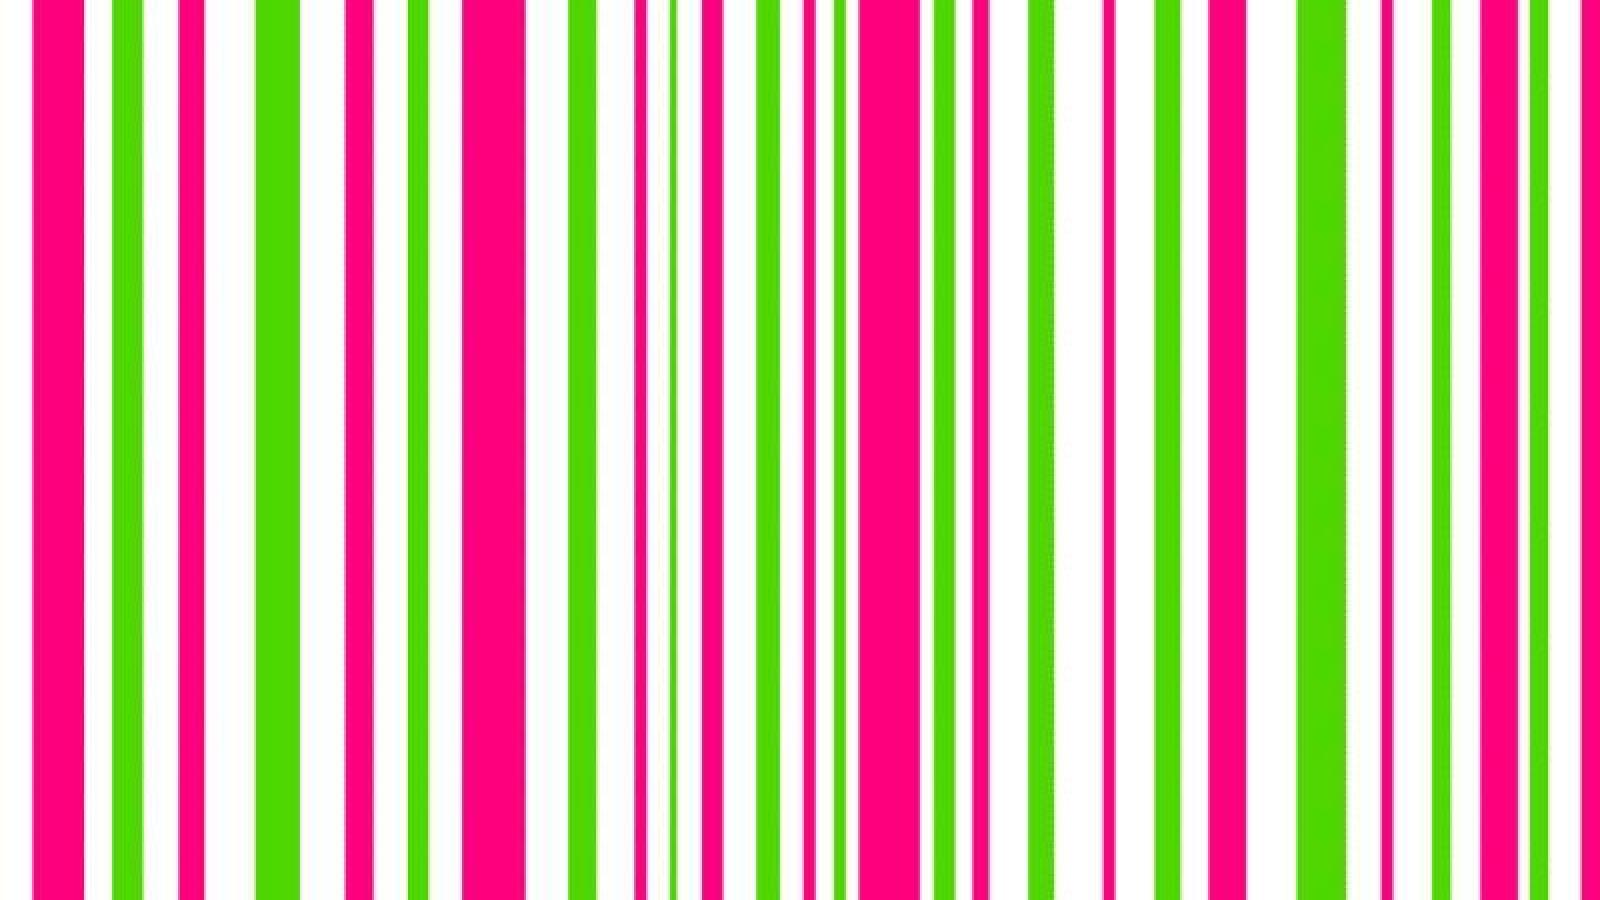 Candy Cane Stripes High Quality And Resolution Wallpaper